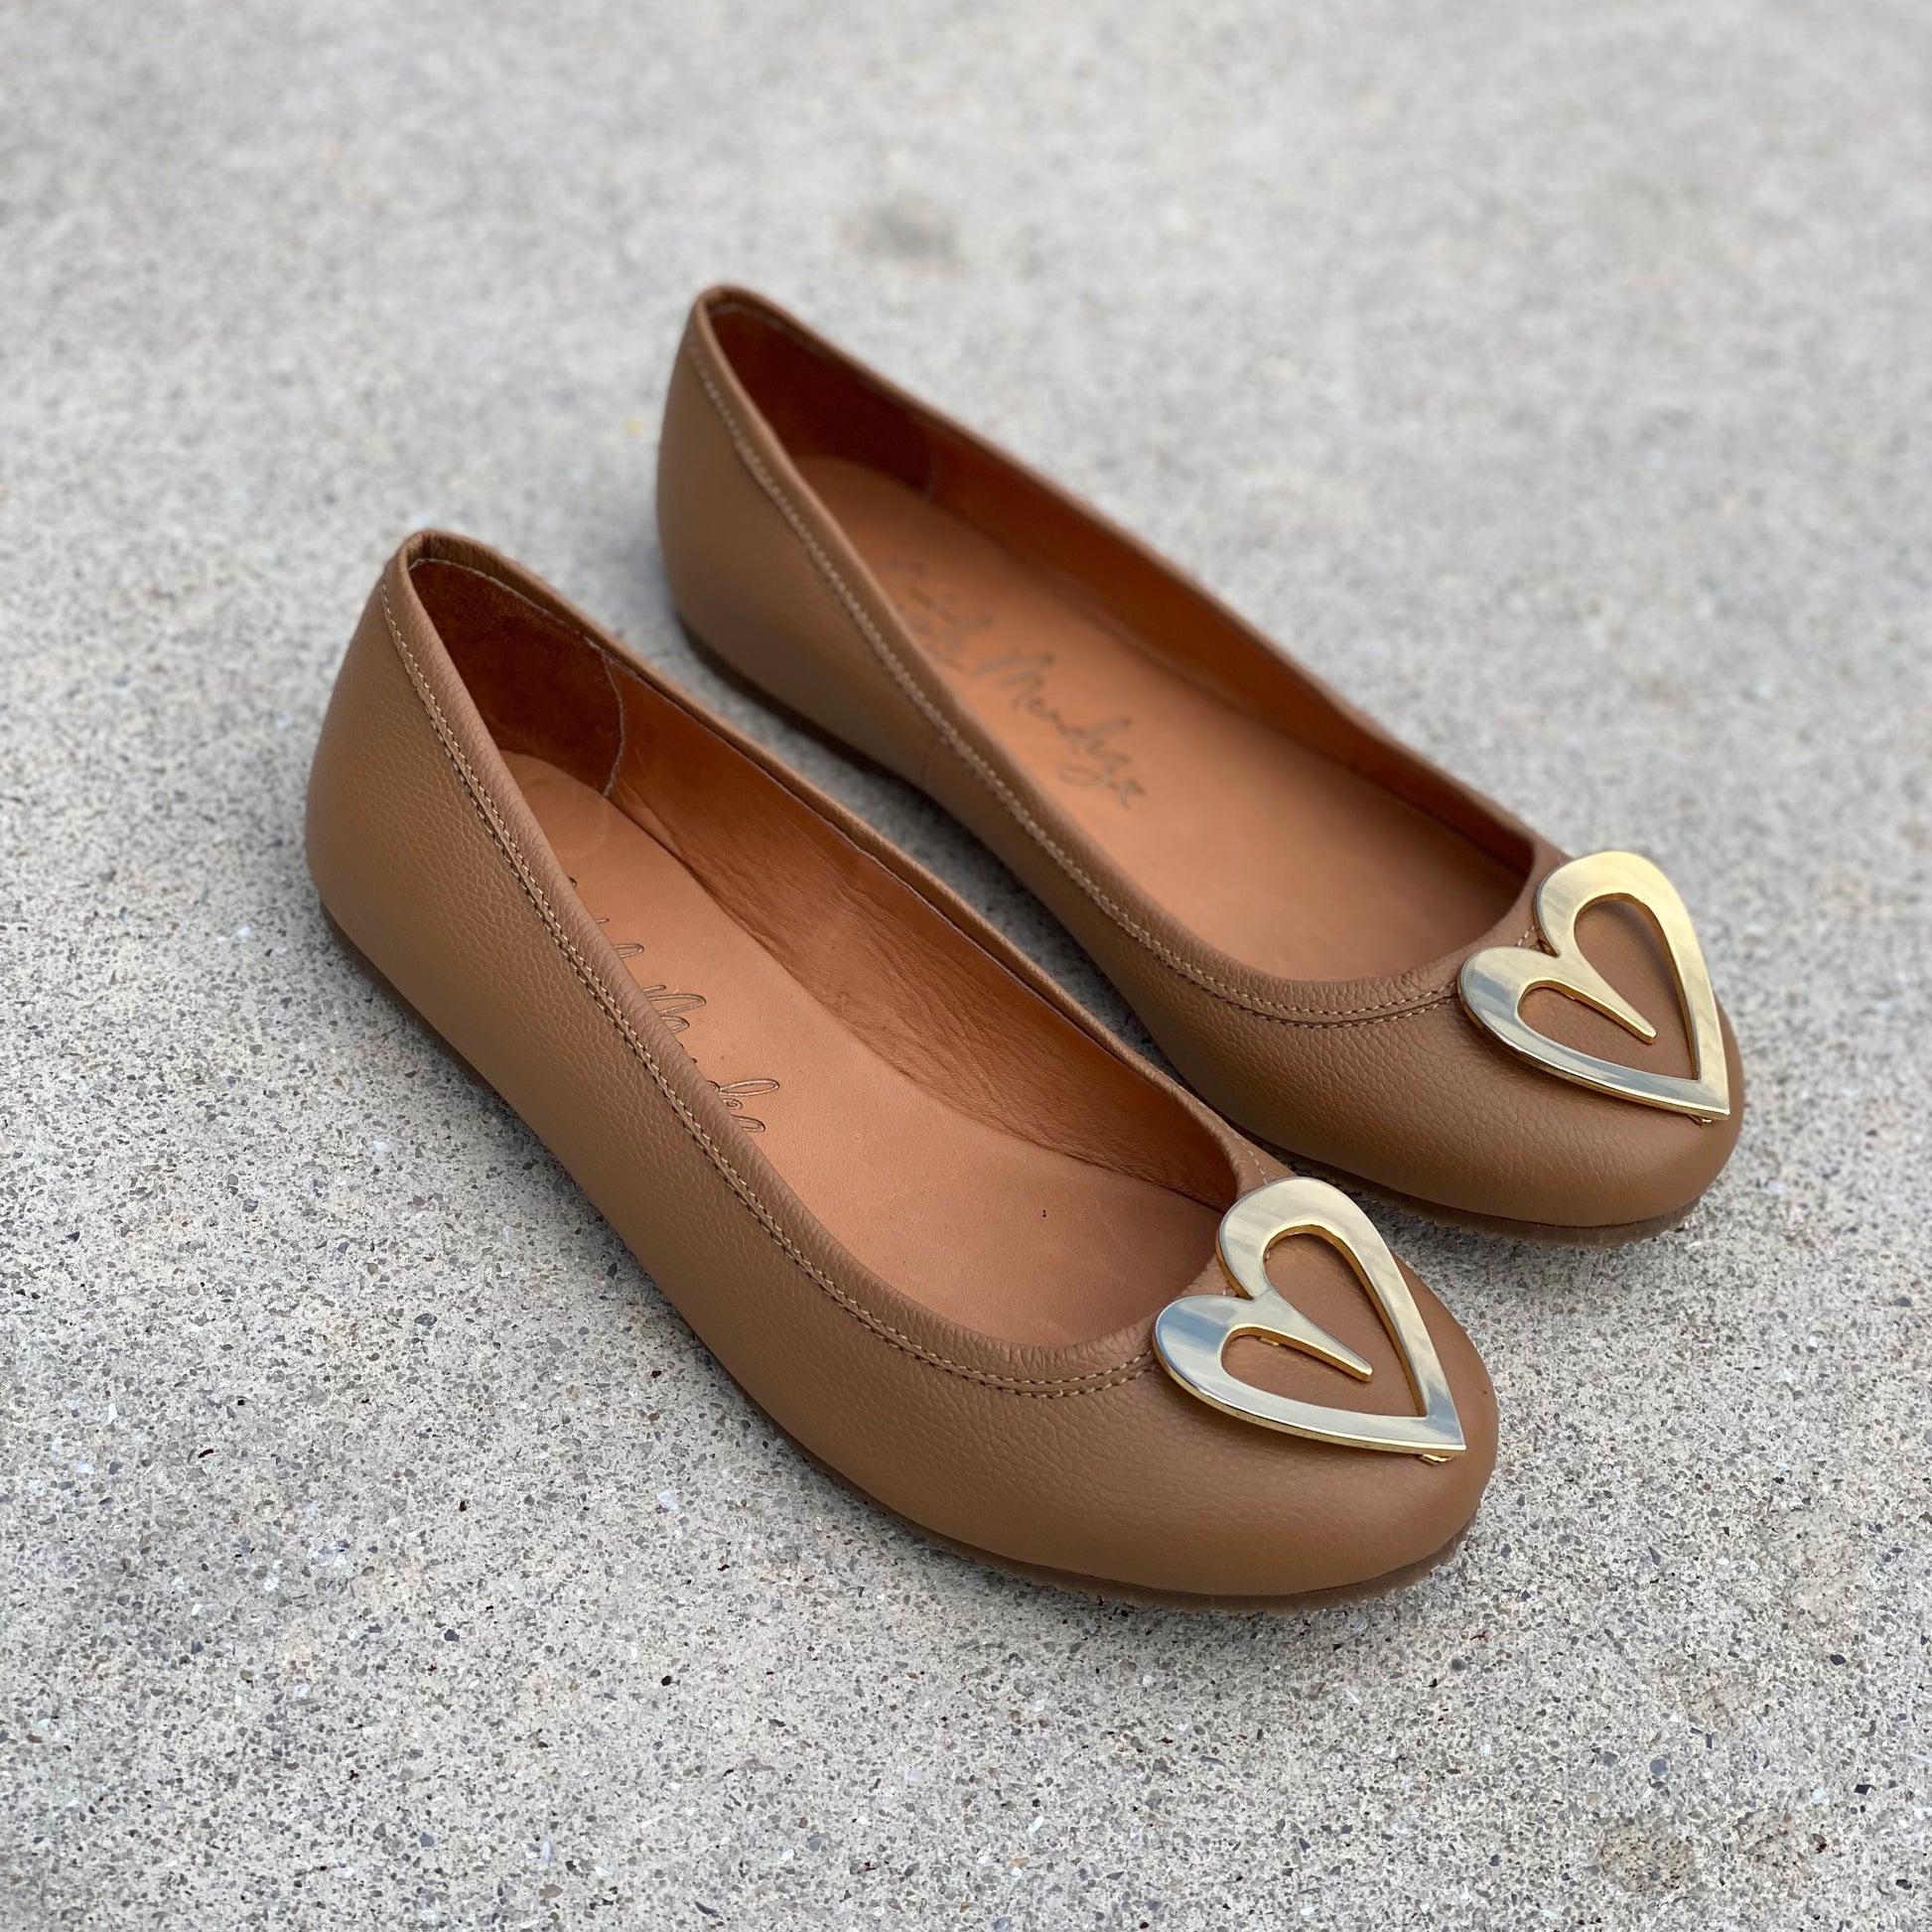 Ballerina Pipa - Camel by Nataly Mendez. Leather upper material Insole lining made of leather Heel height .5 cm